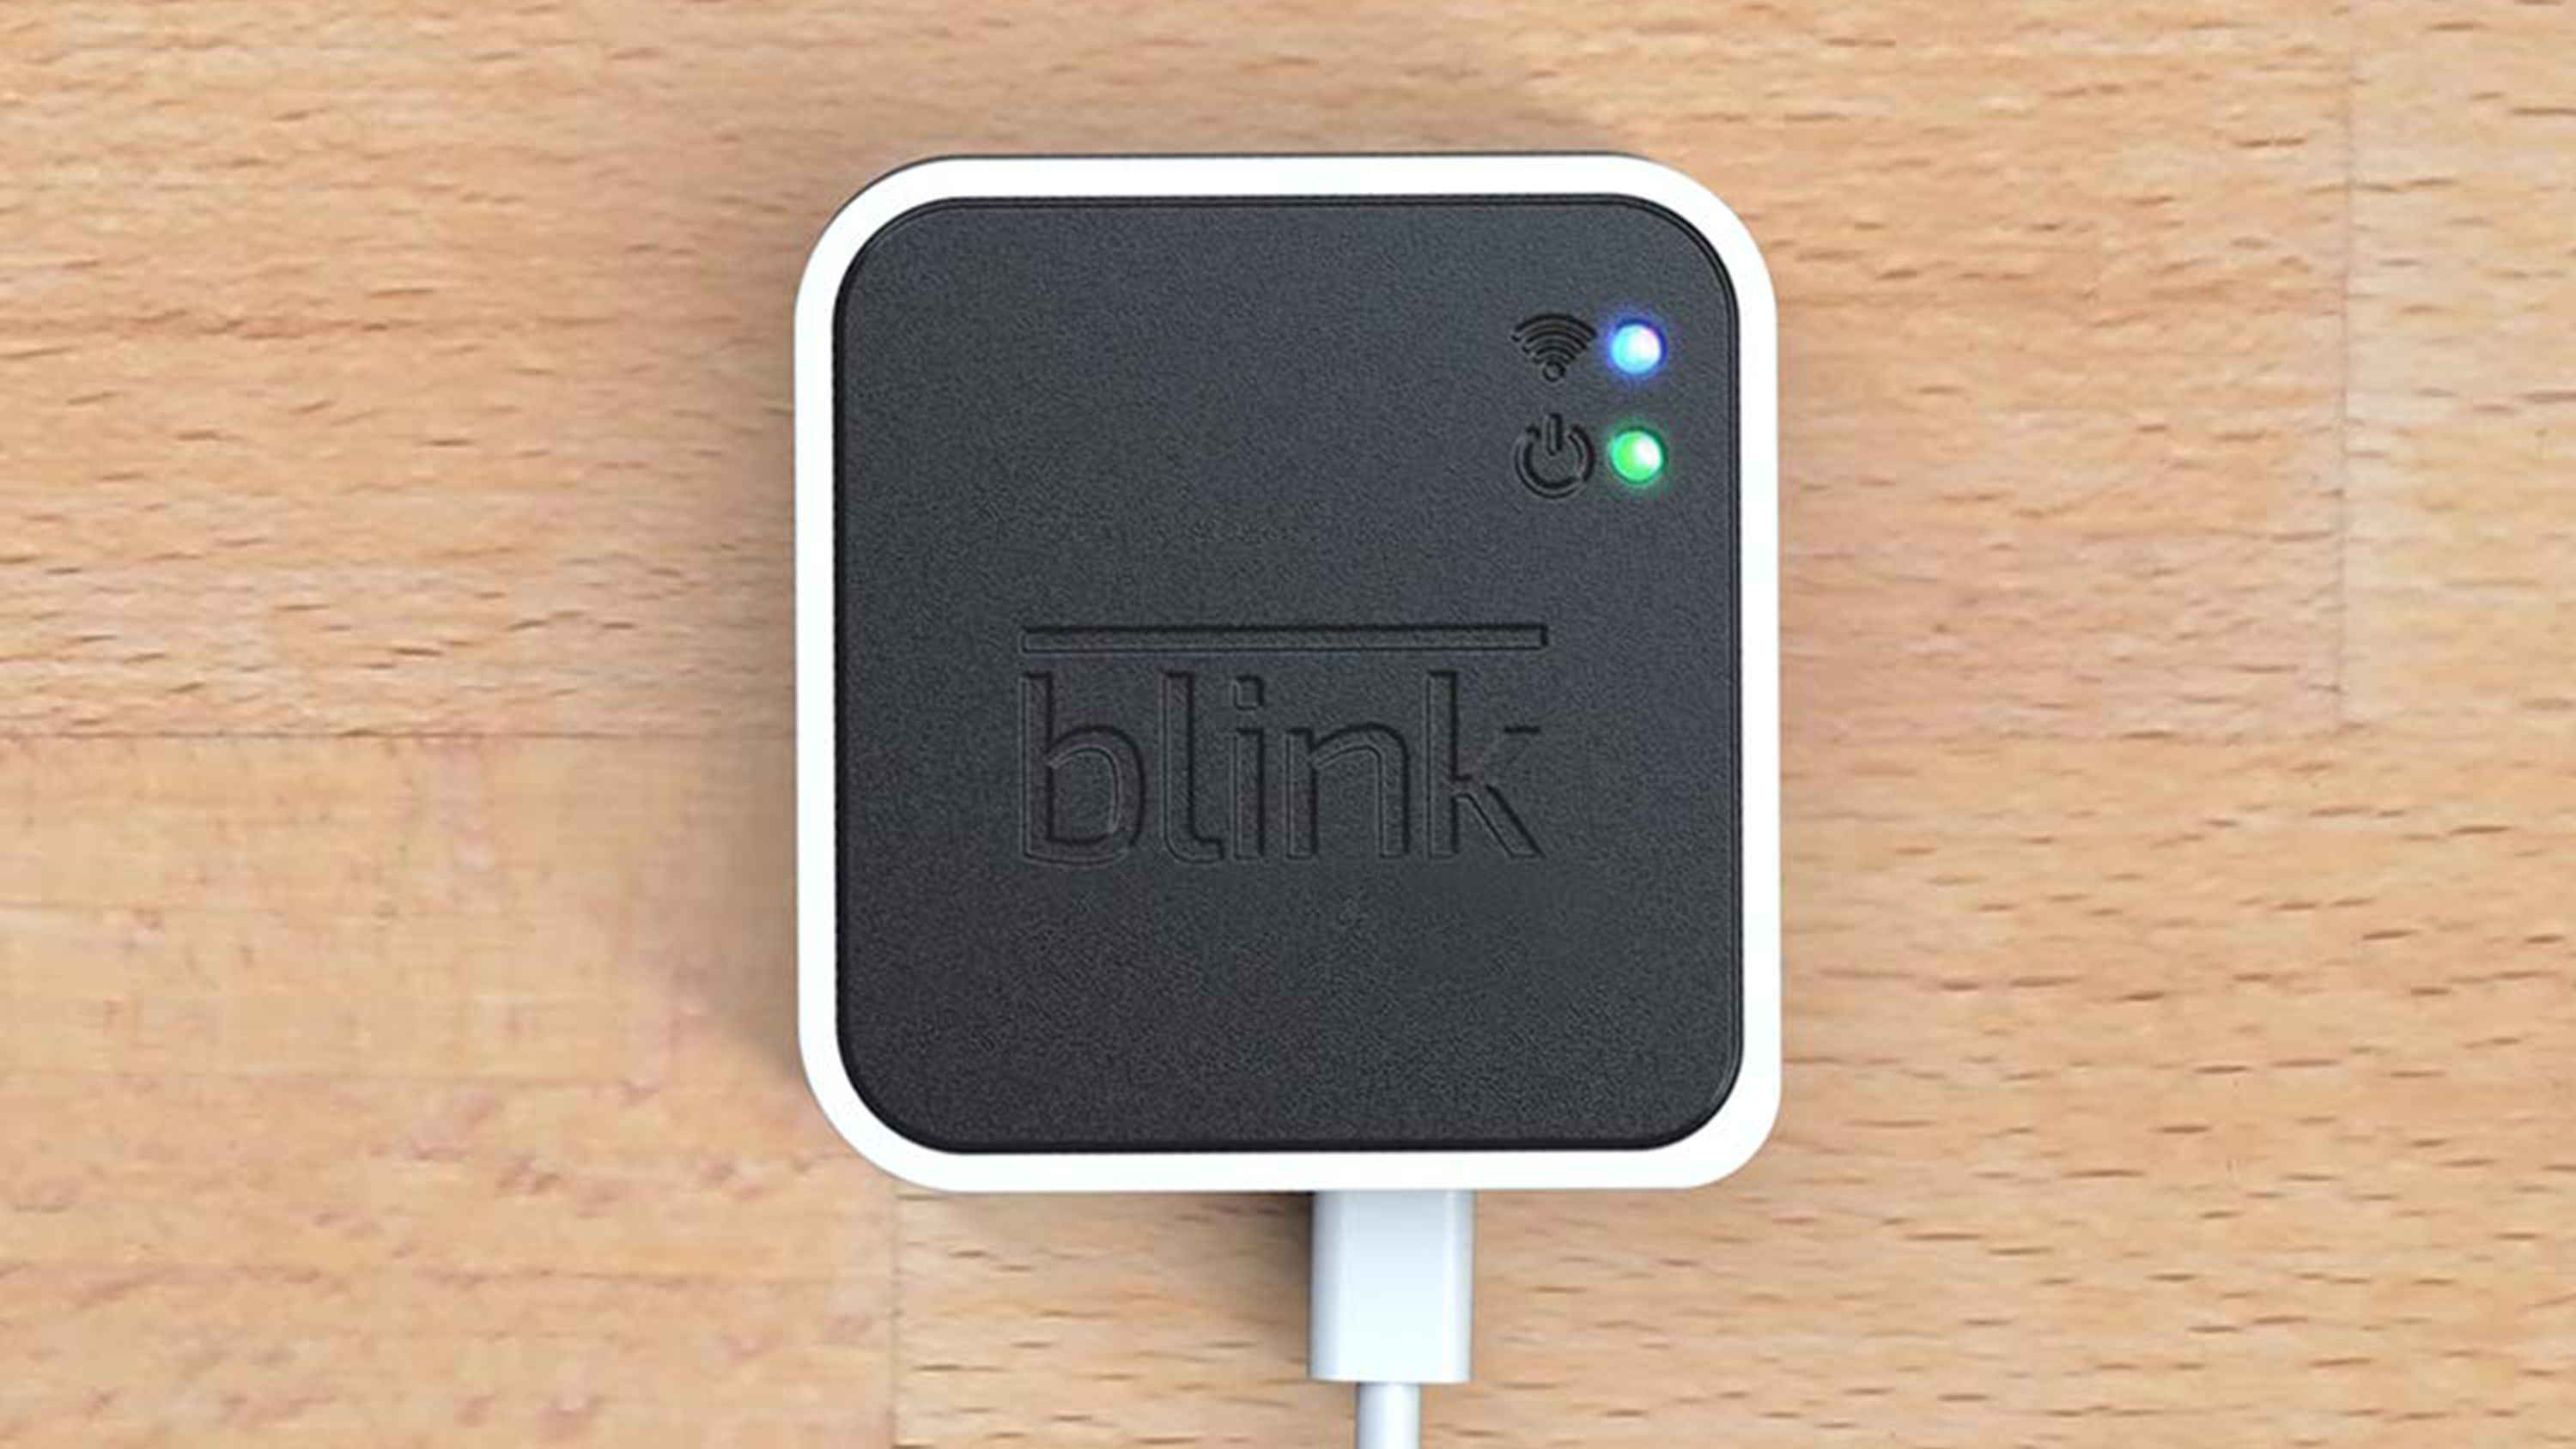 The new $35 Blink Mini indoor camera is Blink's least expensive cam yet